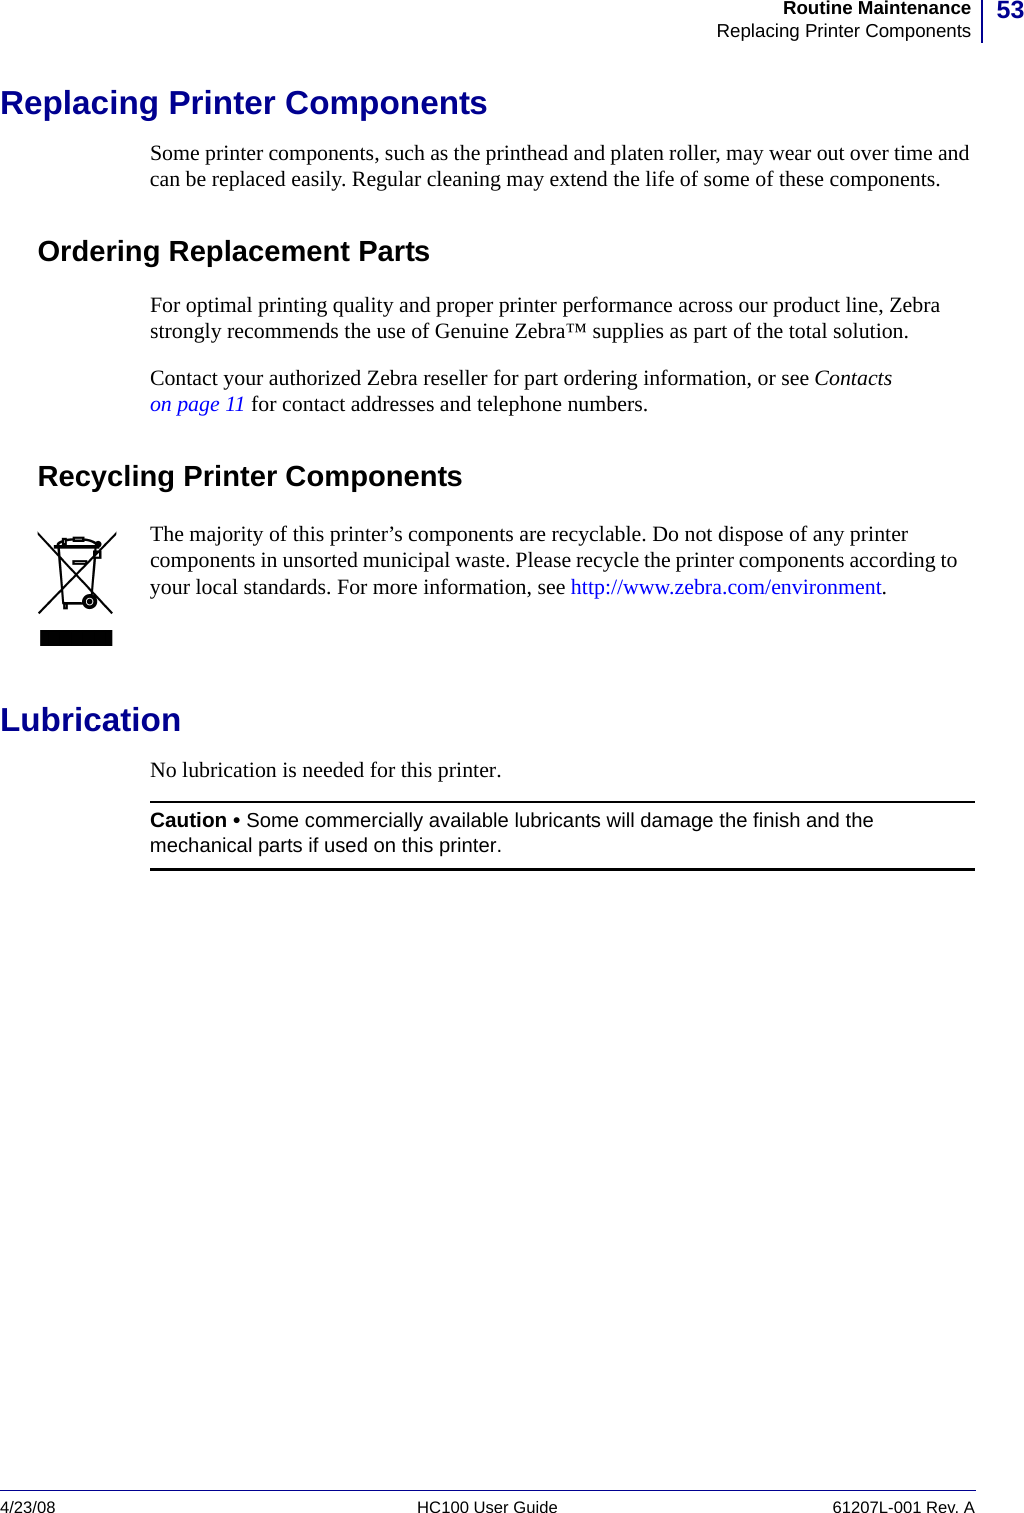 53Routine MaintenanceReplacing Printer Components4/23/08 HC100 User Guide 61207L-001 Rev. AReplacing Printer ComponentsSome printer components, such as the printhead and platen roller, may wear out over time and can be replaced easily. Regular cleaning may extend the life of some of these components.Ordering Replacement PartsFor optimal printing quality and proper printer performance across our product line, Zebra strongly recommends the use of Genuine Zebra™ supplies as part of the total solution. Contact your authorized Zebra reseller for part ordering information, or see Contacts on page 11 for contact addresses and telephone numbers.Recycling Printer ComponentsLubricationNo lubrication is needed for this printer.The majority of this printer’s components are recyclable. Do not dispose of any printer components in unsorted municipal waste. Please recycle the printer components according to your local standards. For more information, see http://www.zebra.com/environment.Caution • Some commercially available lubricants will damage the finish and the mechanical parts if used on this printer.